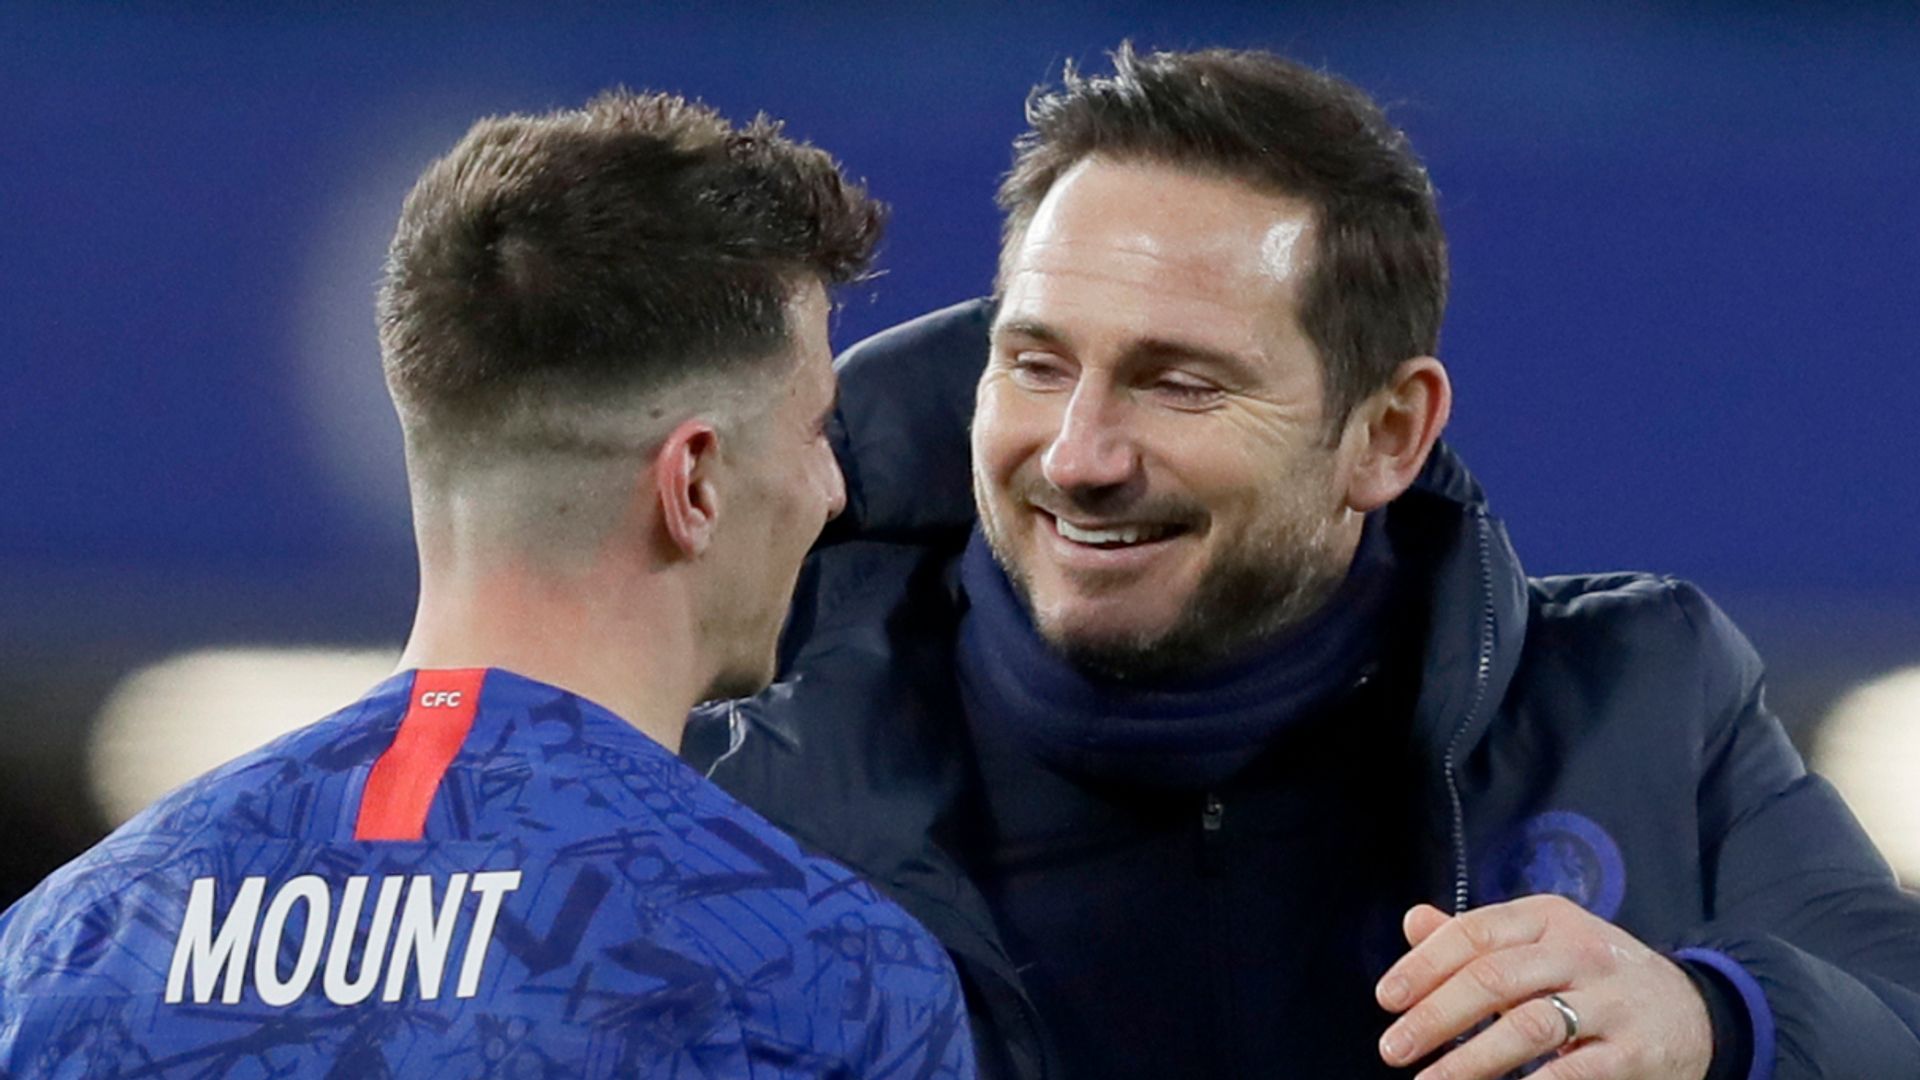 Lampard: Mount is a huge player for Chelsea